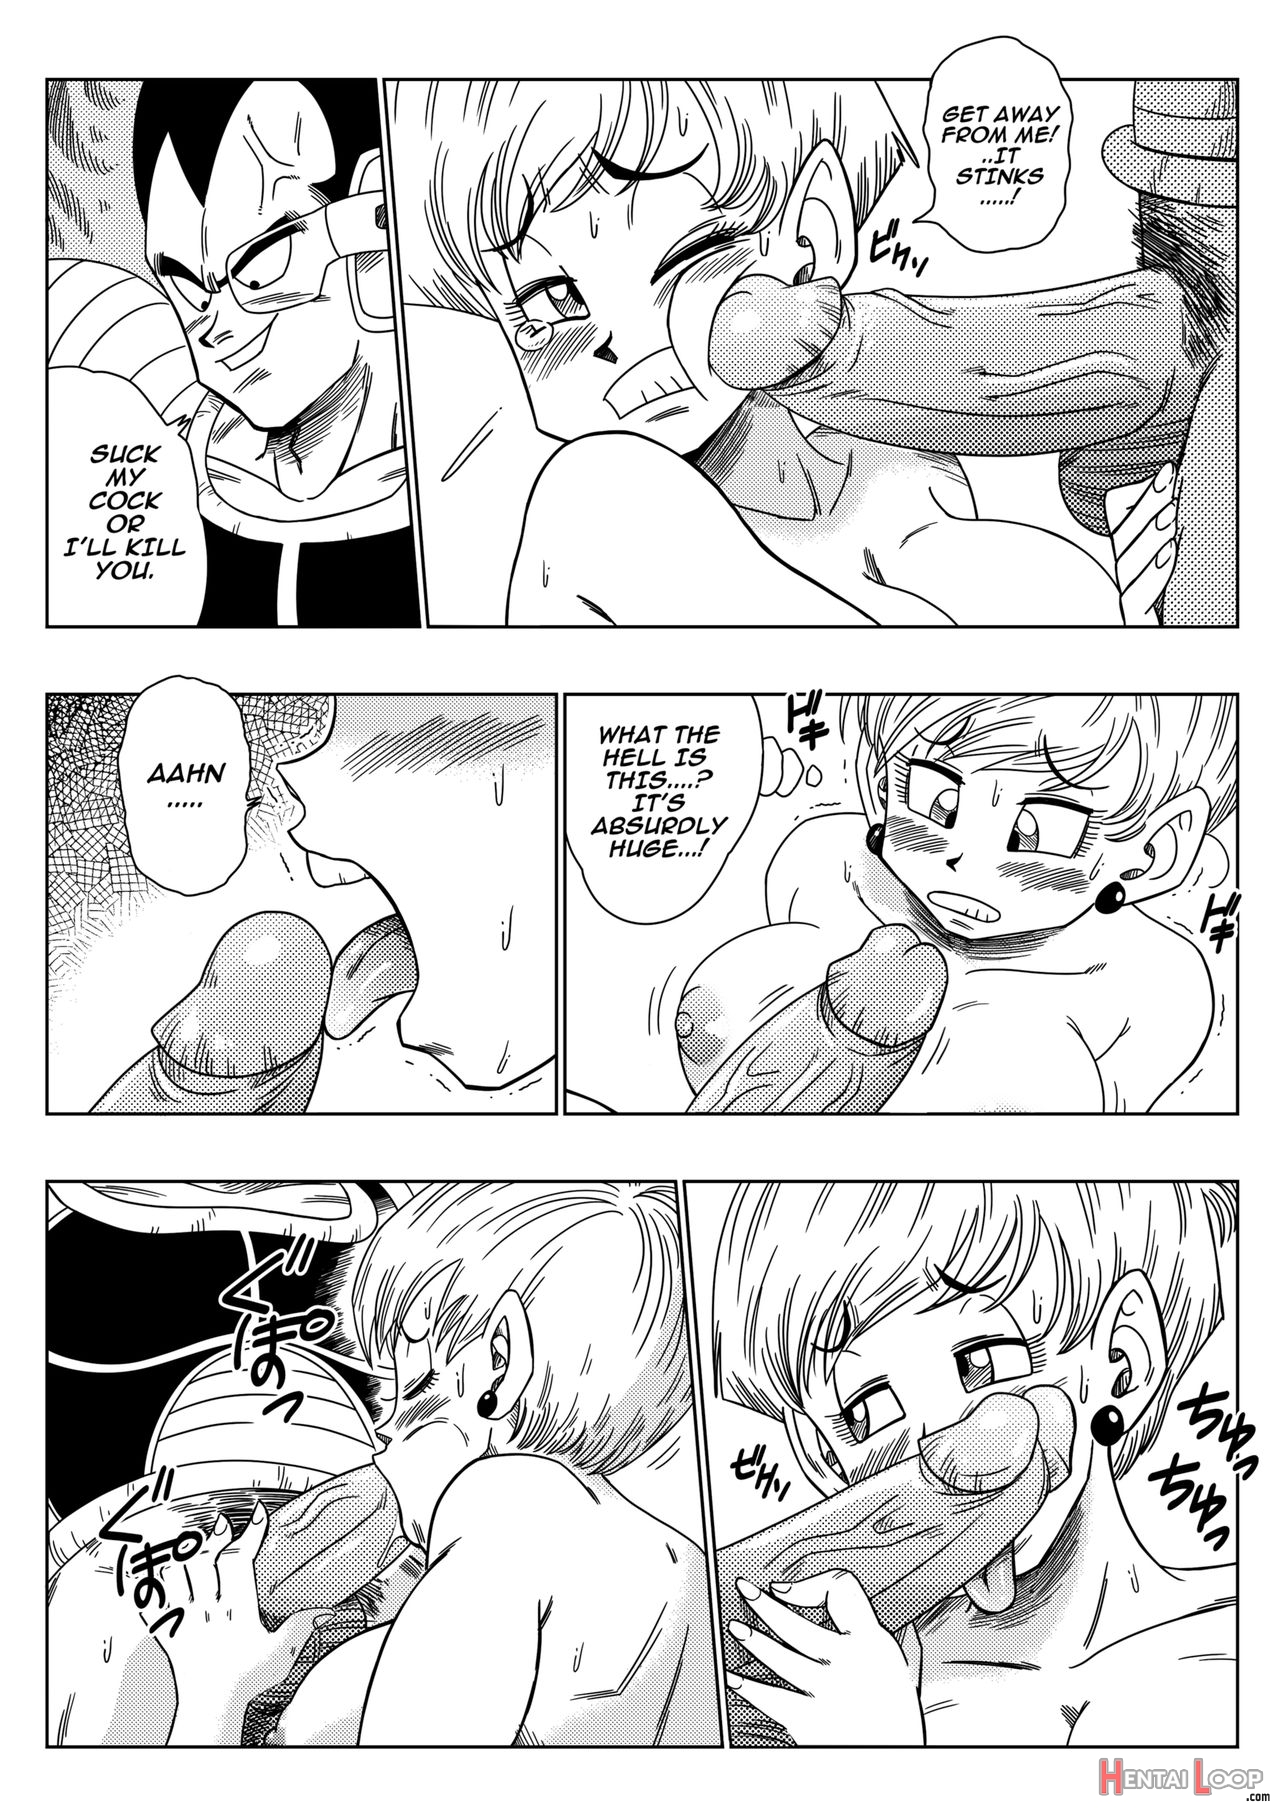 The Evil Brother Uncensored page 14